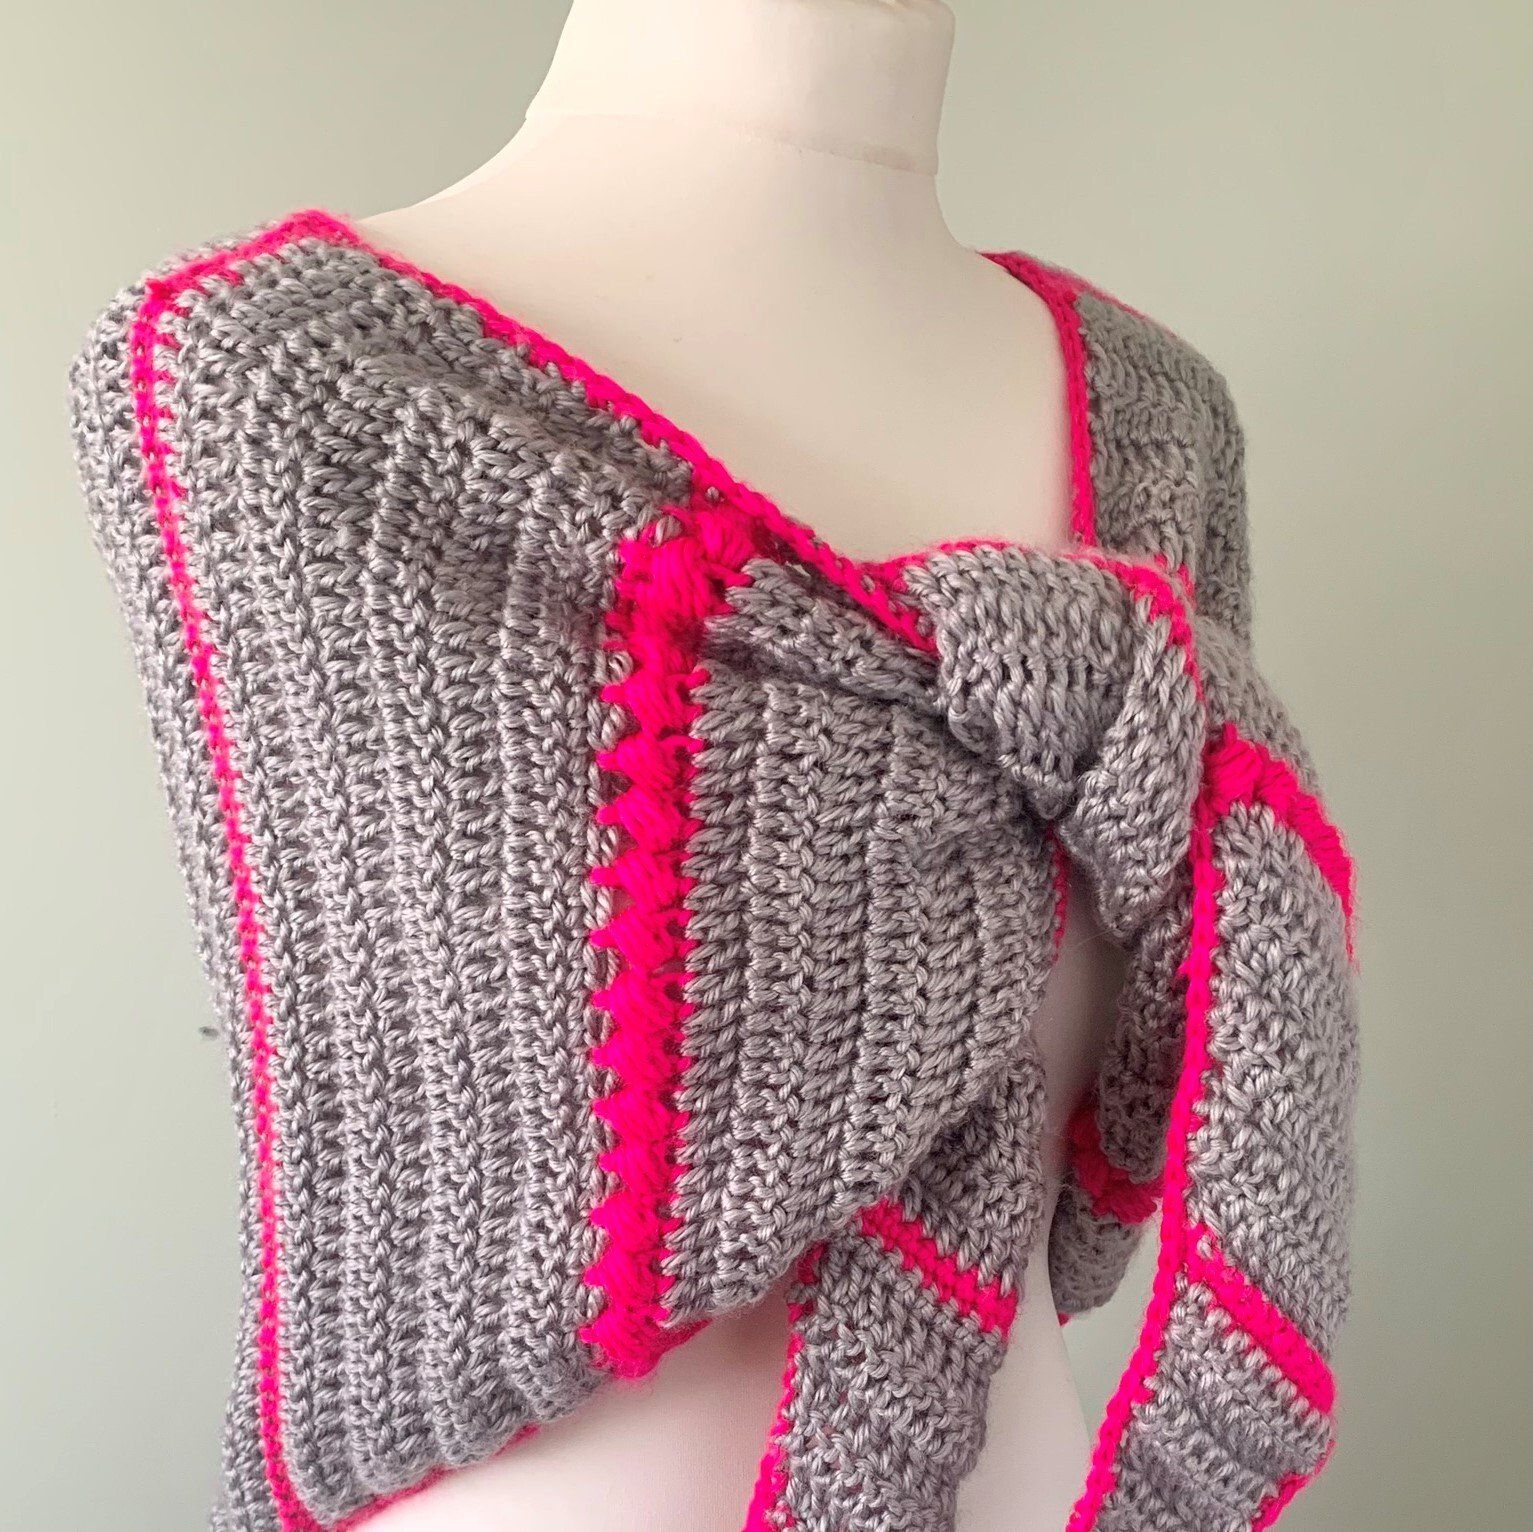 How to crochet a triangle shawl